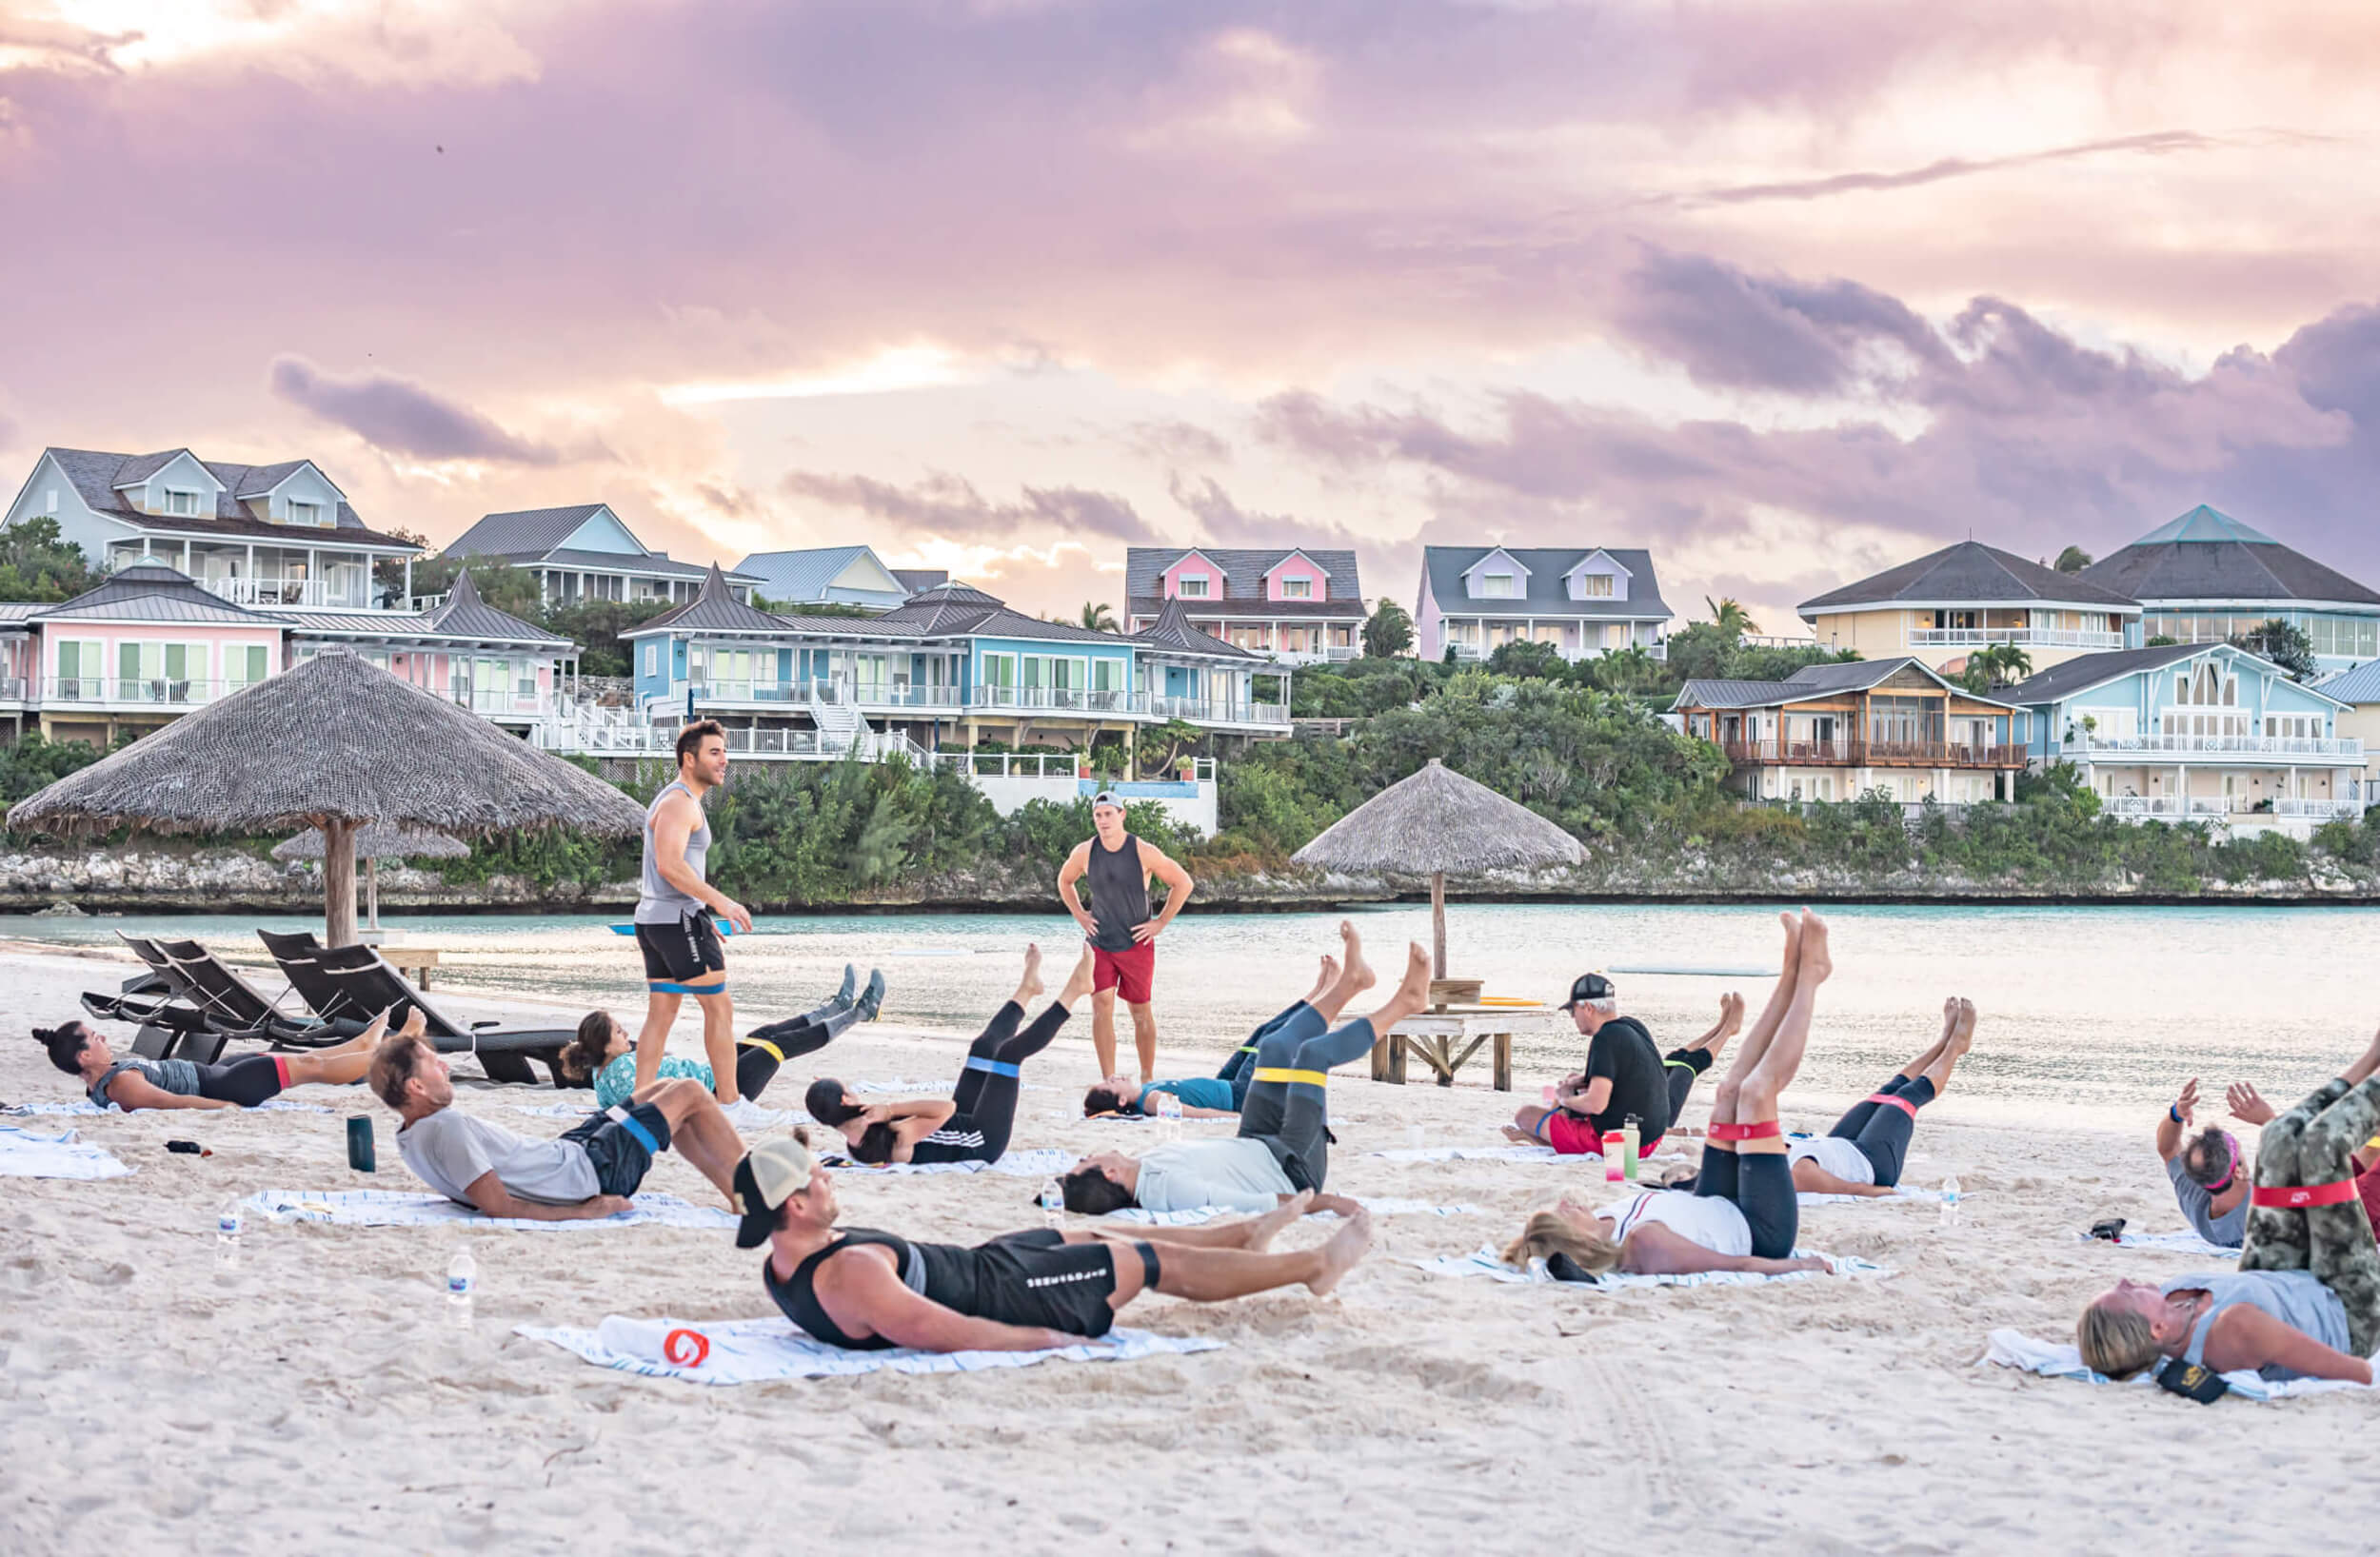 People exercising at the Abaco Club showing community spirit and club lifestyle in Bahamas.